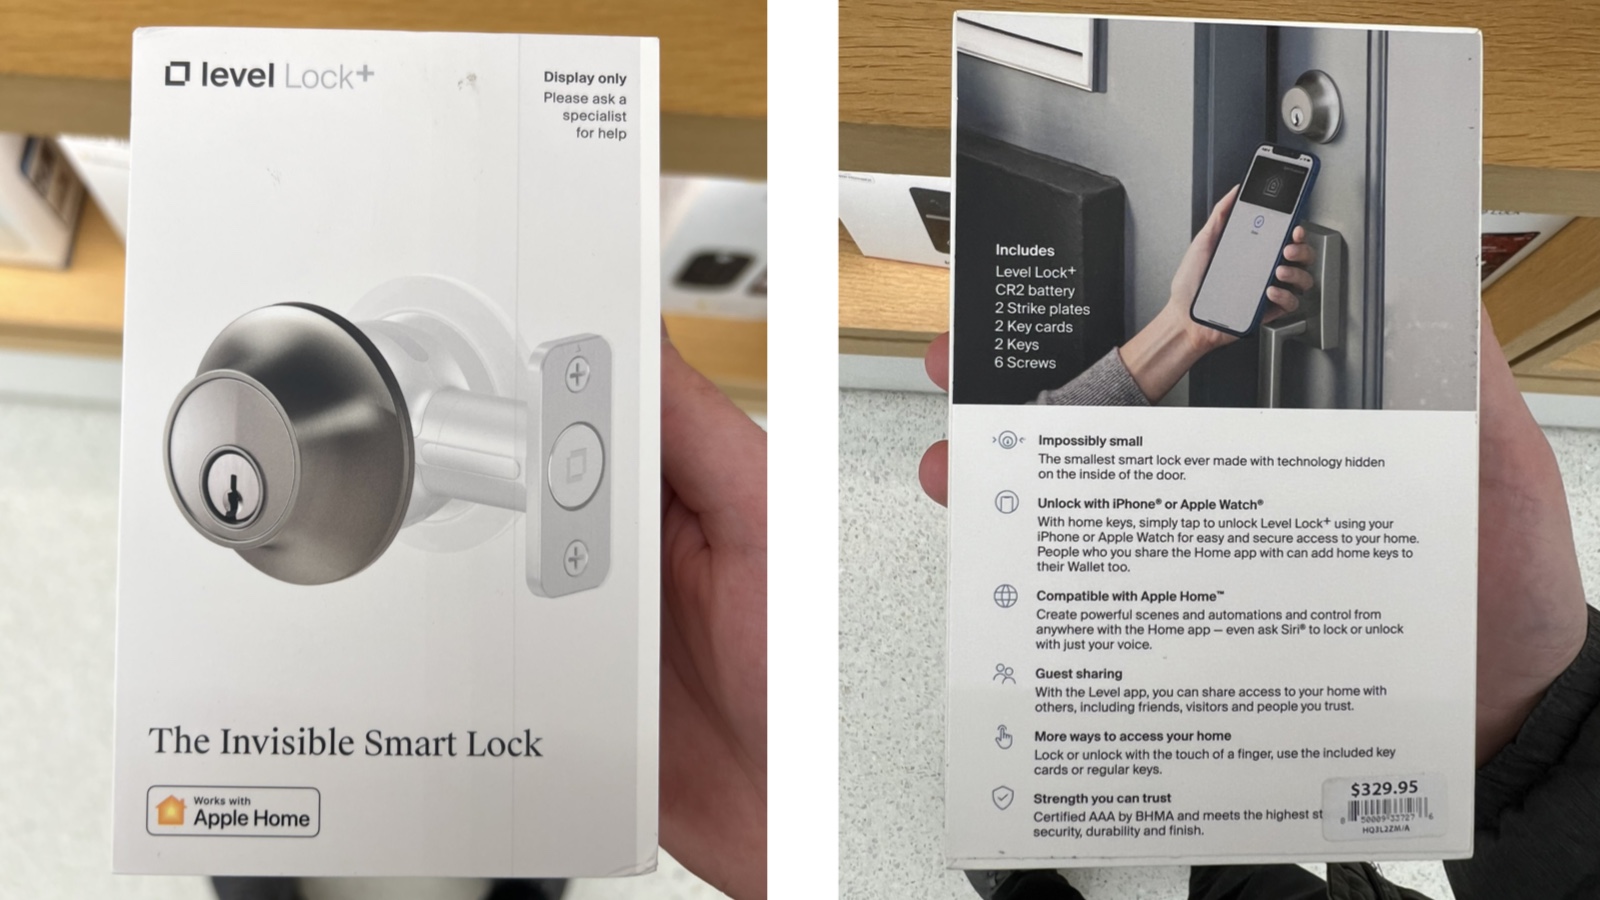 Level Lock+ Smart Lock With Home Key Support Launches in Apple Retail Stores